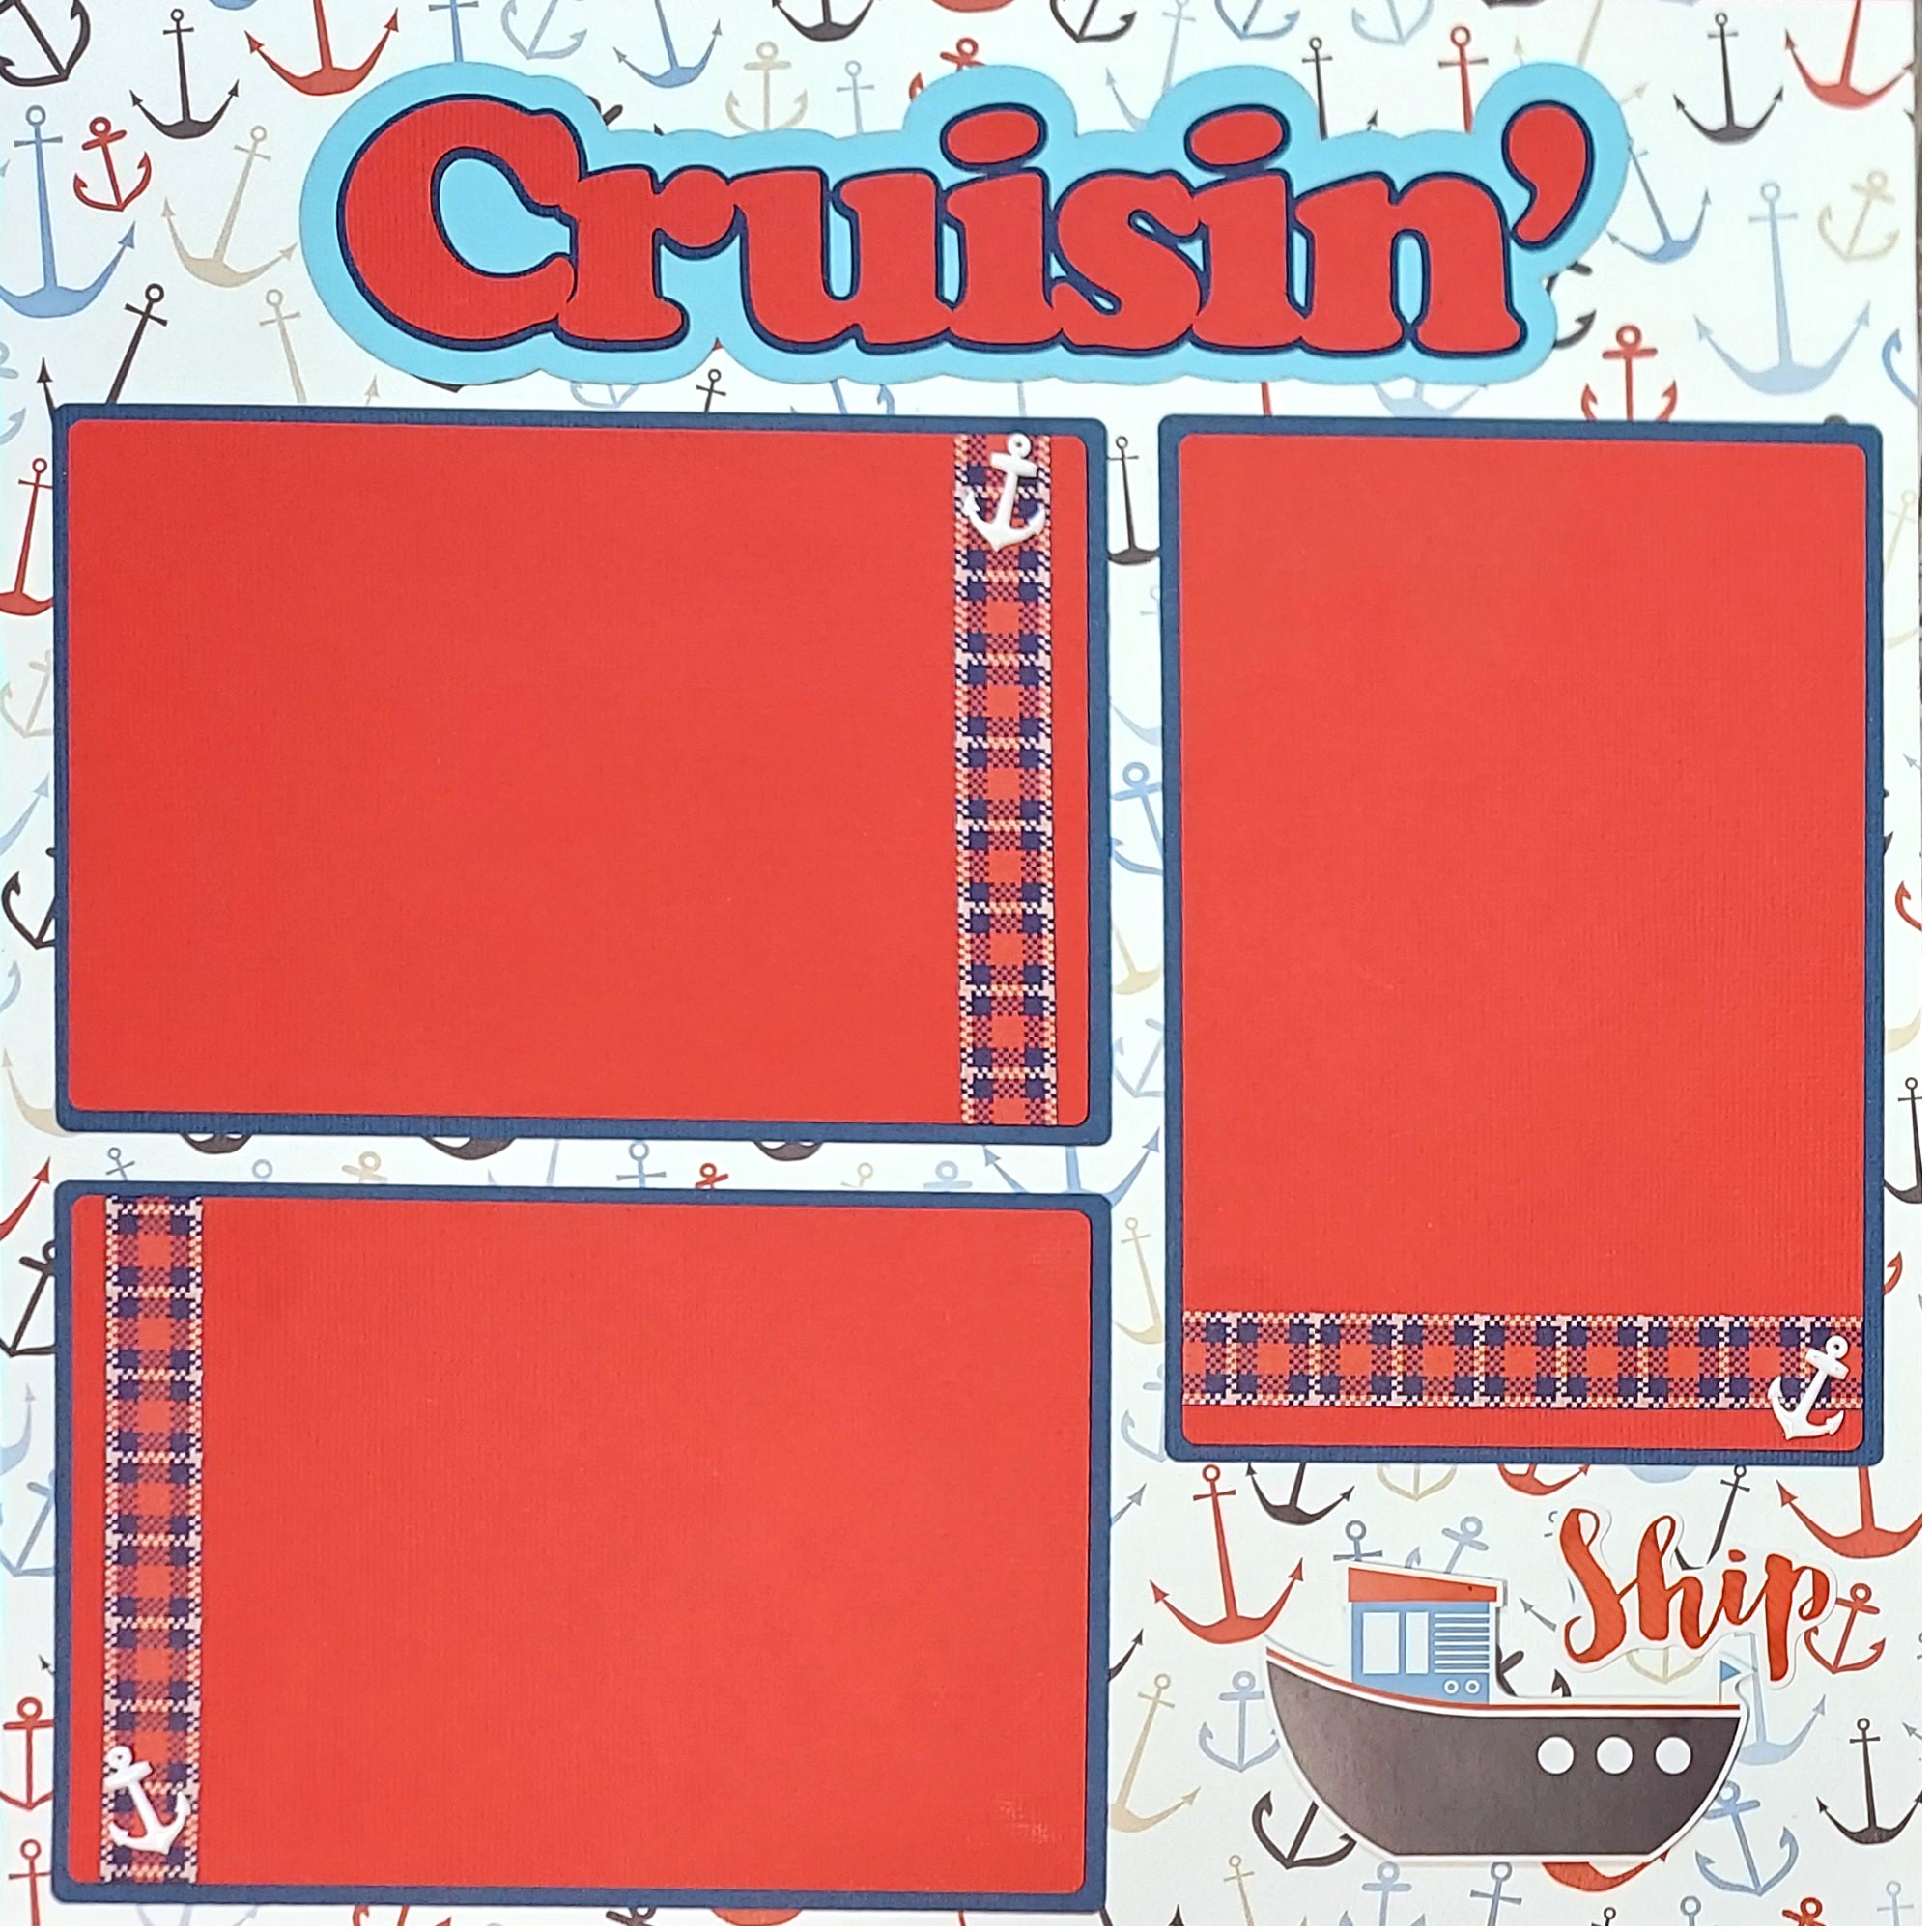 Ahoy! Cruisin' (2) - 12 x 12 Pages, Fully-Assembled & Hand-Crafted 3D Scrapbook Premade by SSC Designs